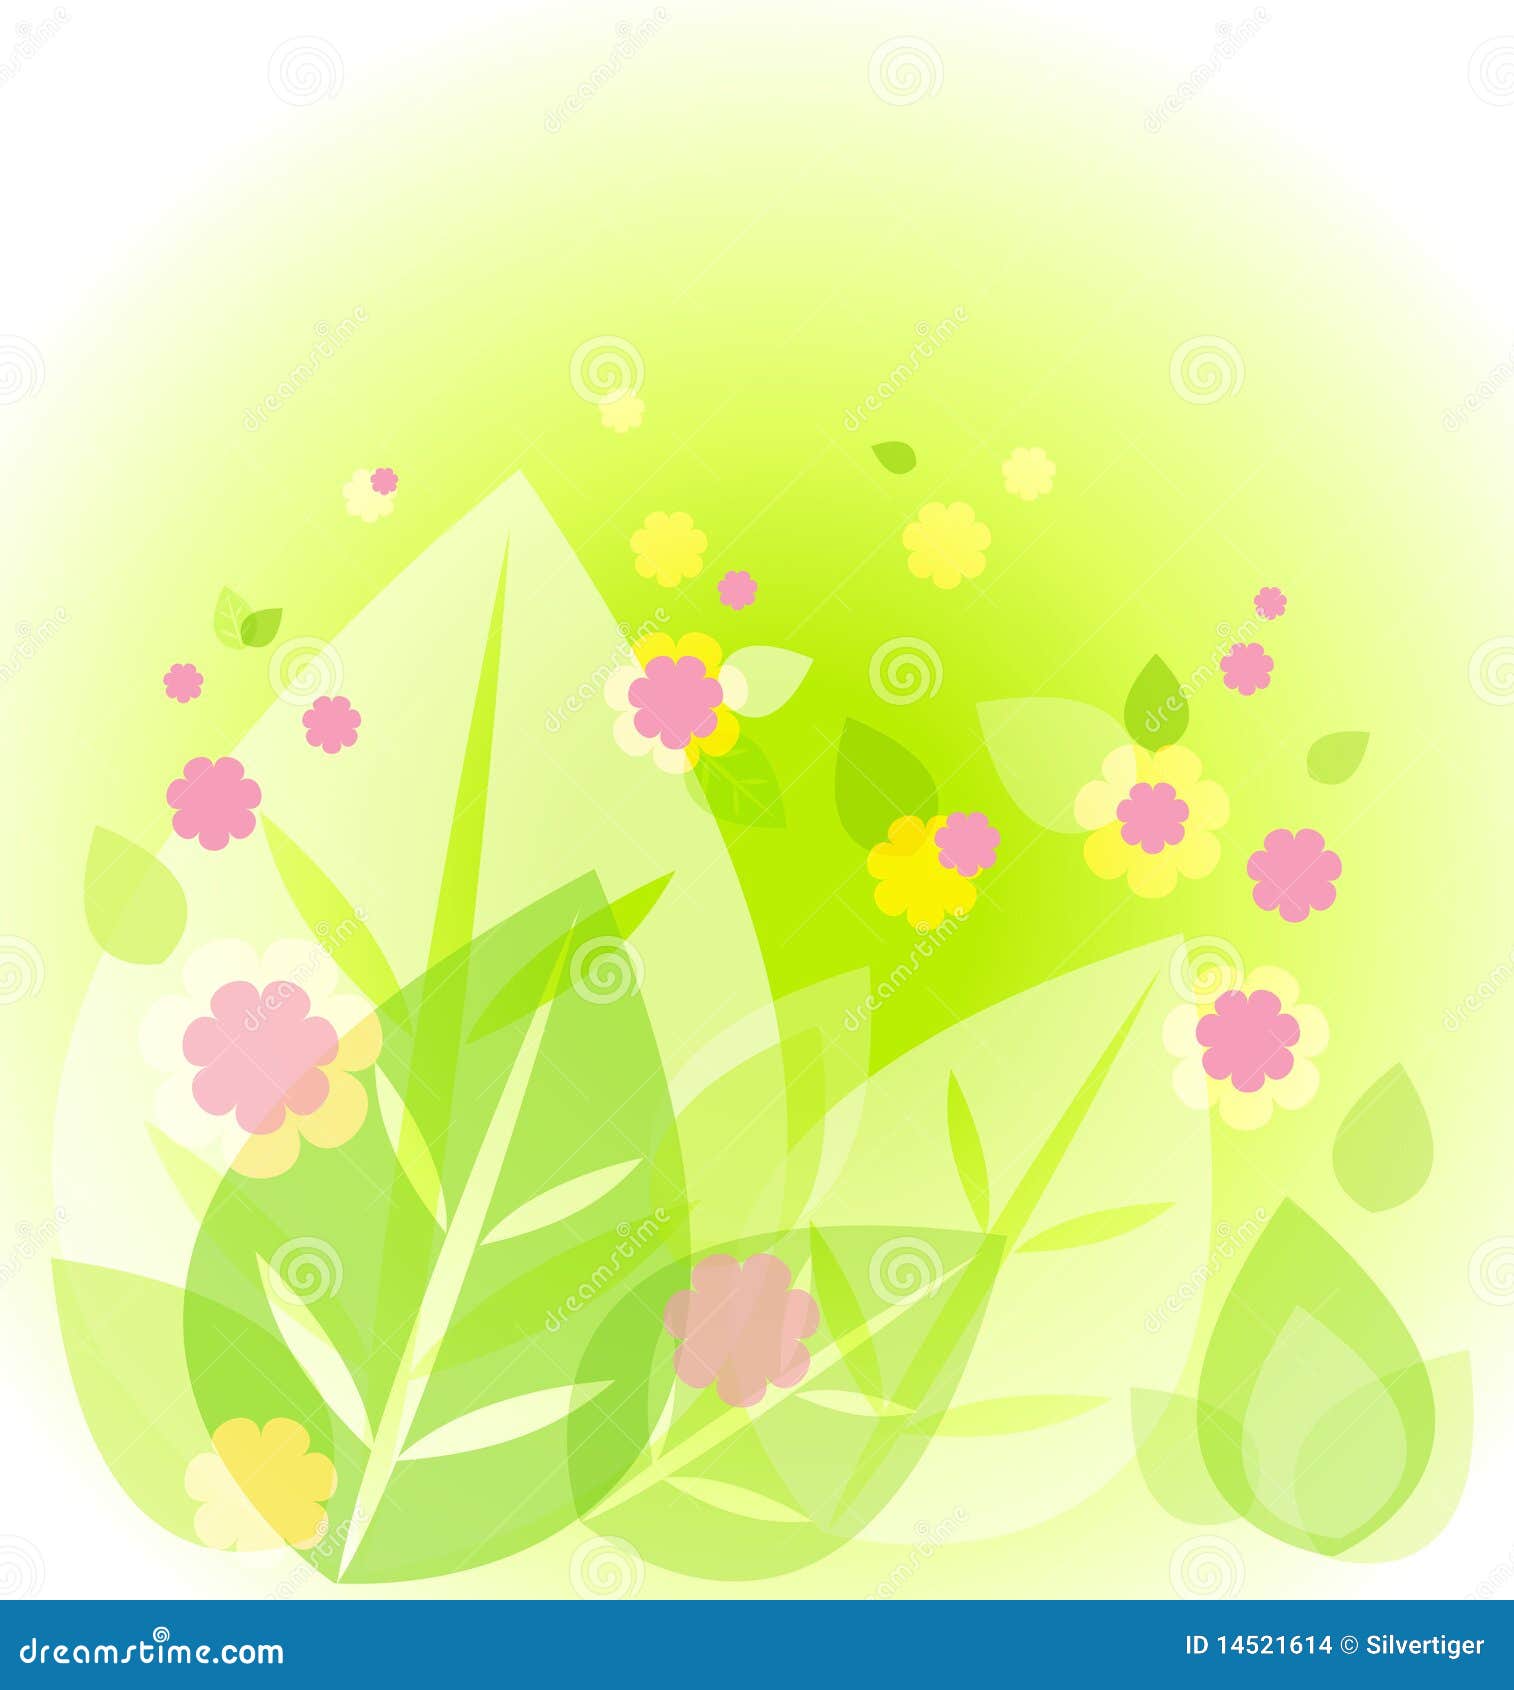 Abstract Cute Green Background Stock Vector - Illustration ...